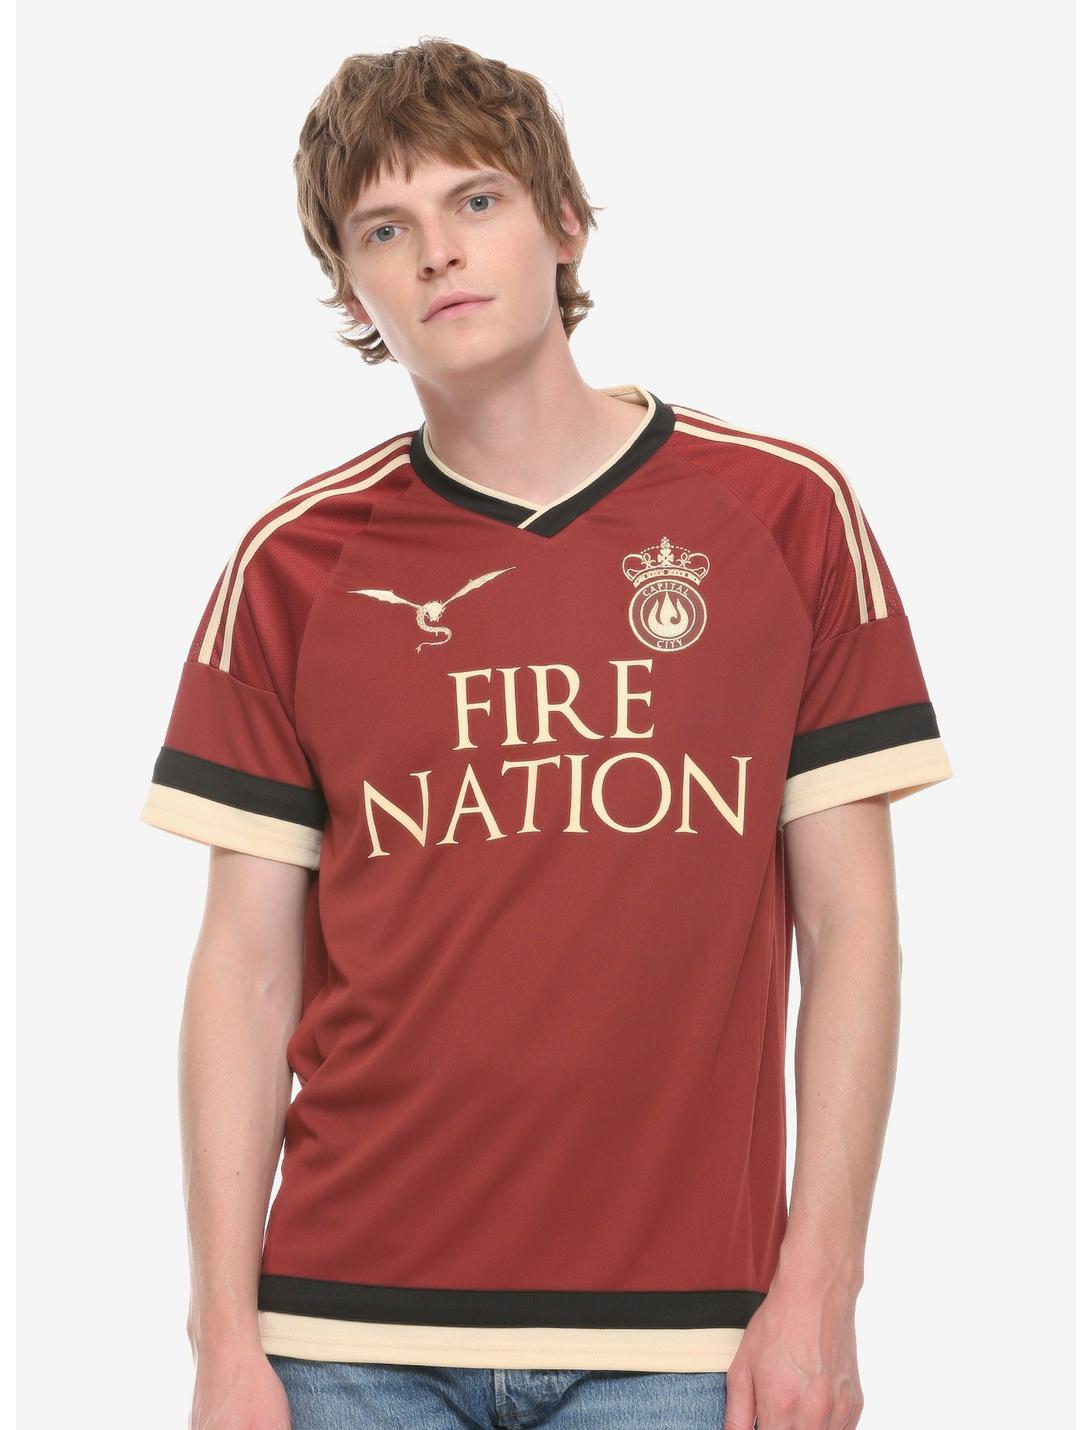 Avatar: The Last Airbender Fire Nation Jersey - BoxLunch Exclusive, RED, hi-res